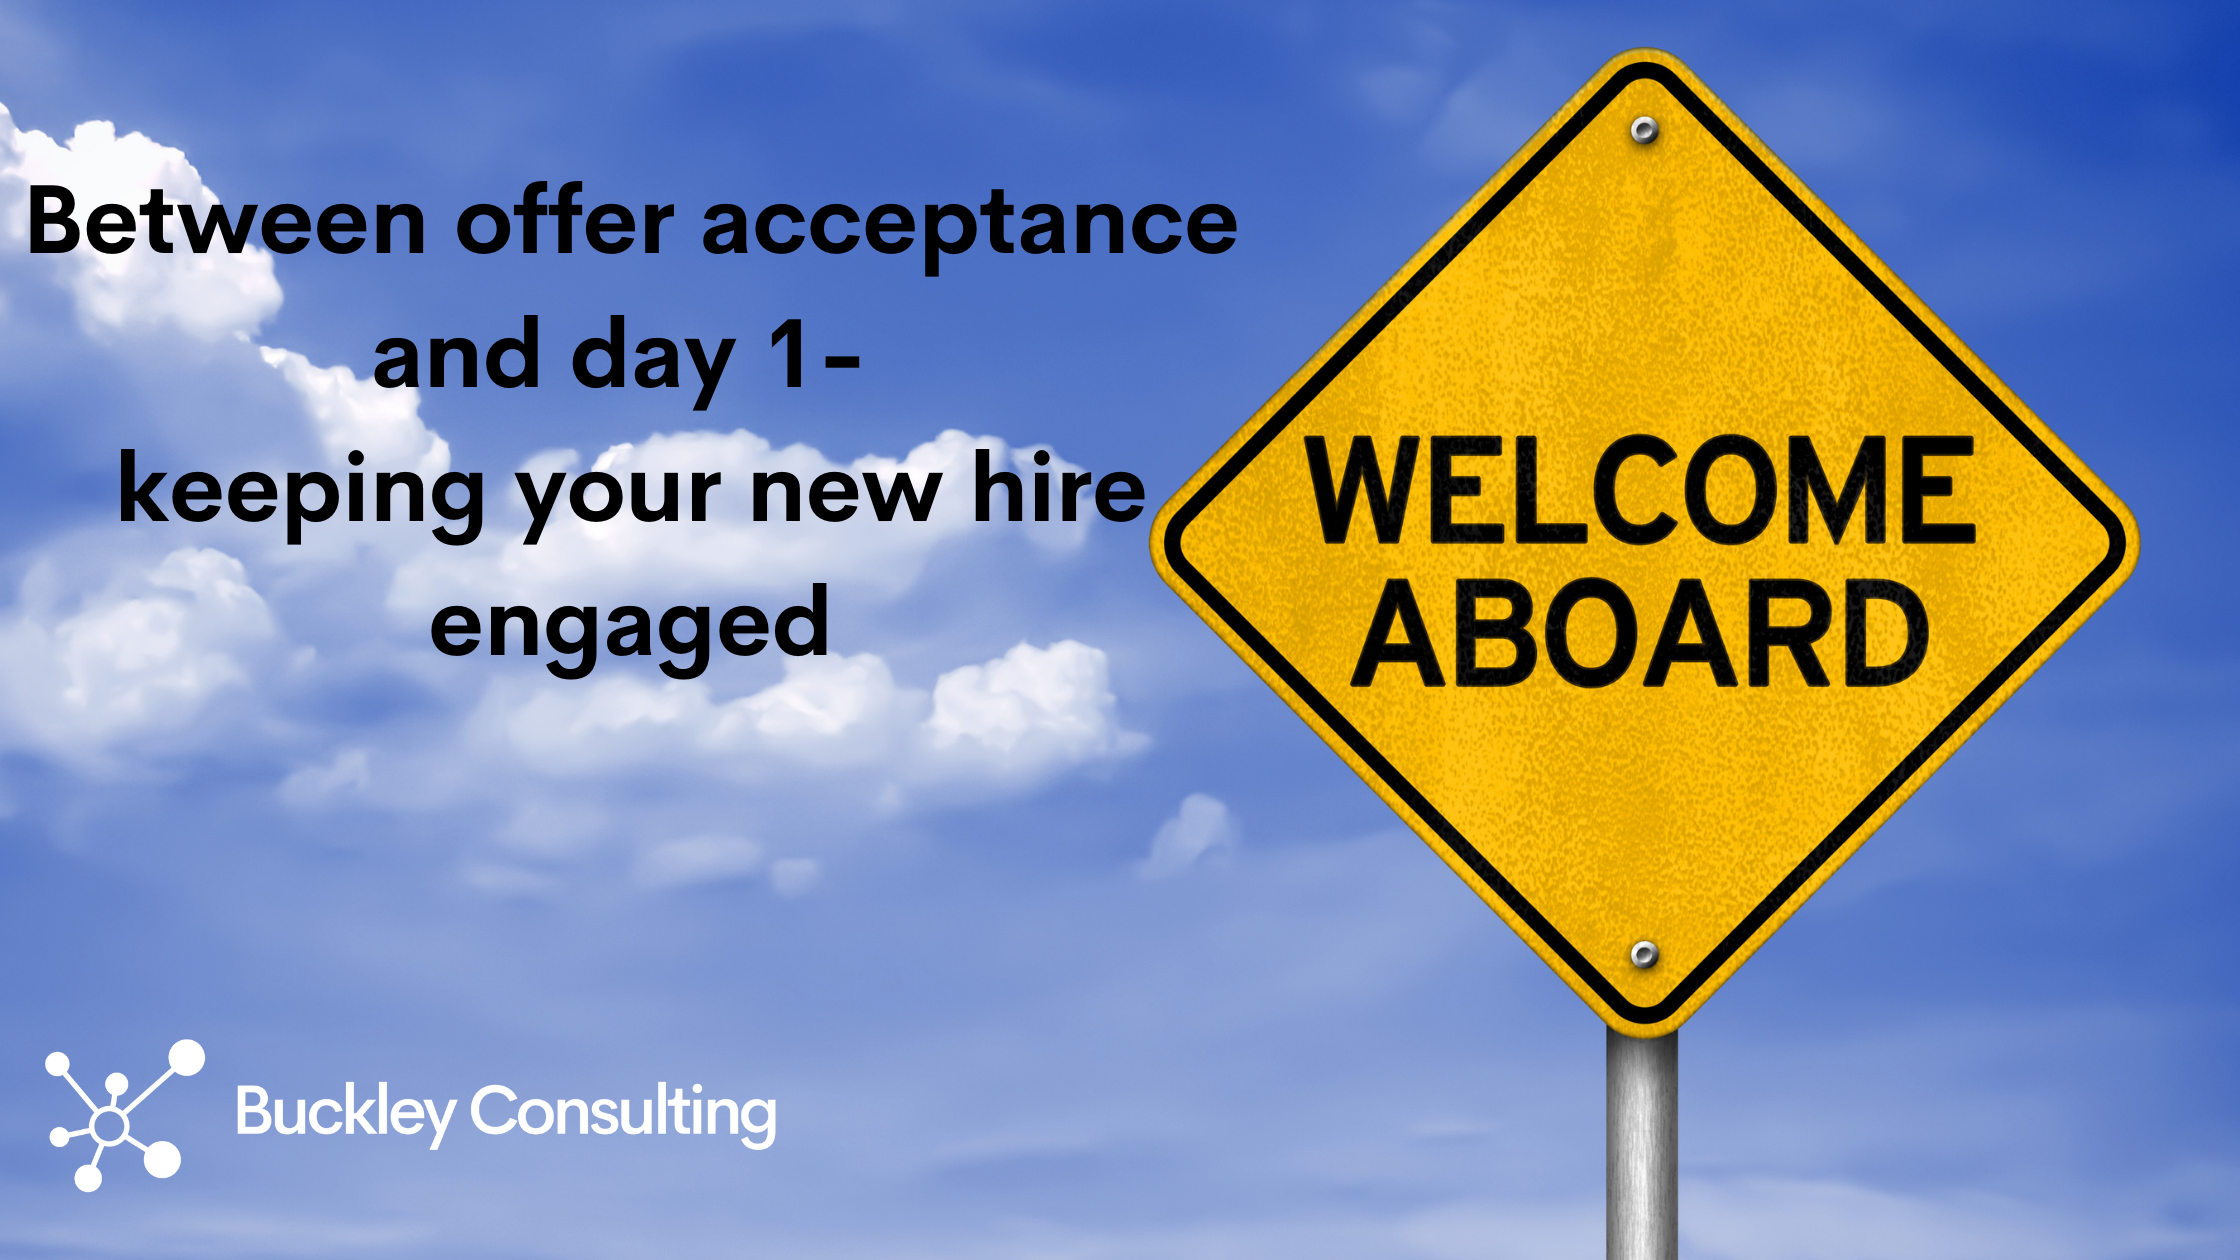 Between offer acceptance and day 1 – keeping your new hire engaged